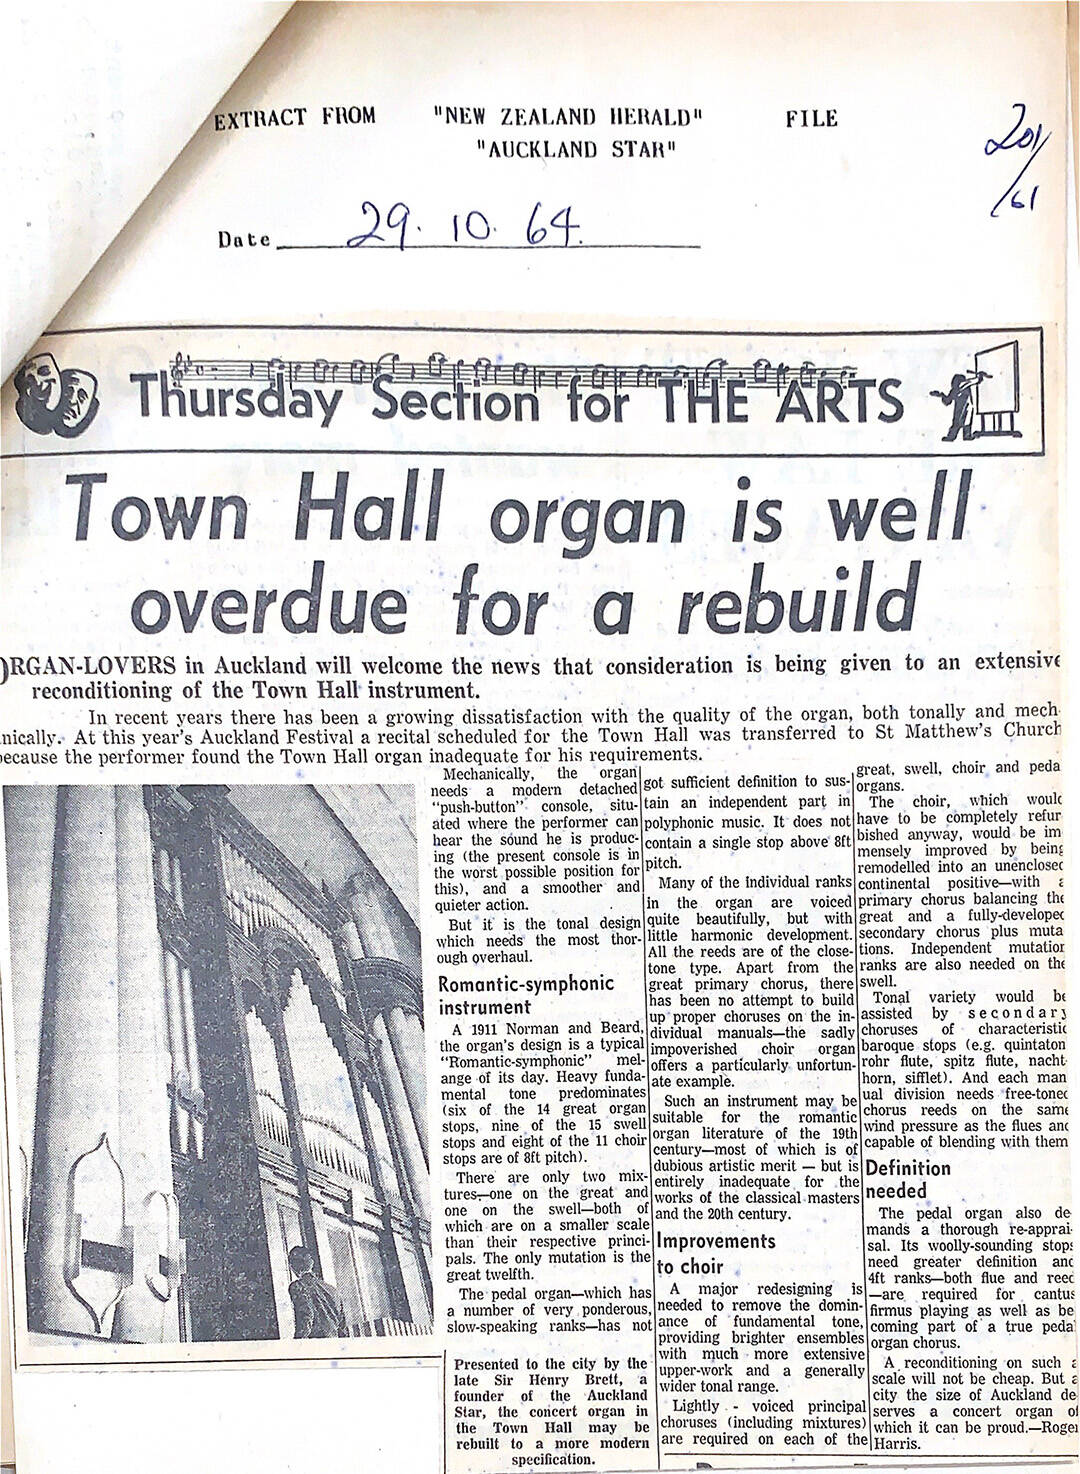 <p>Article from the Auckland Star, published 29 October 1964 | Auckland City Council Archives ACC 201/61</p>
